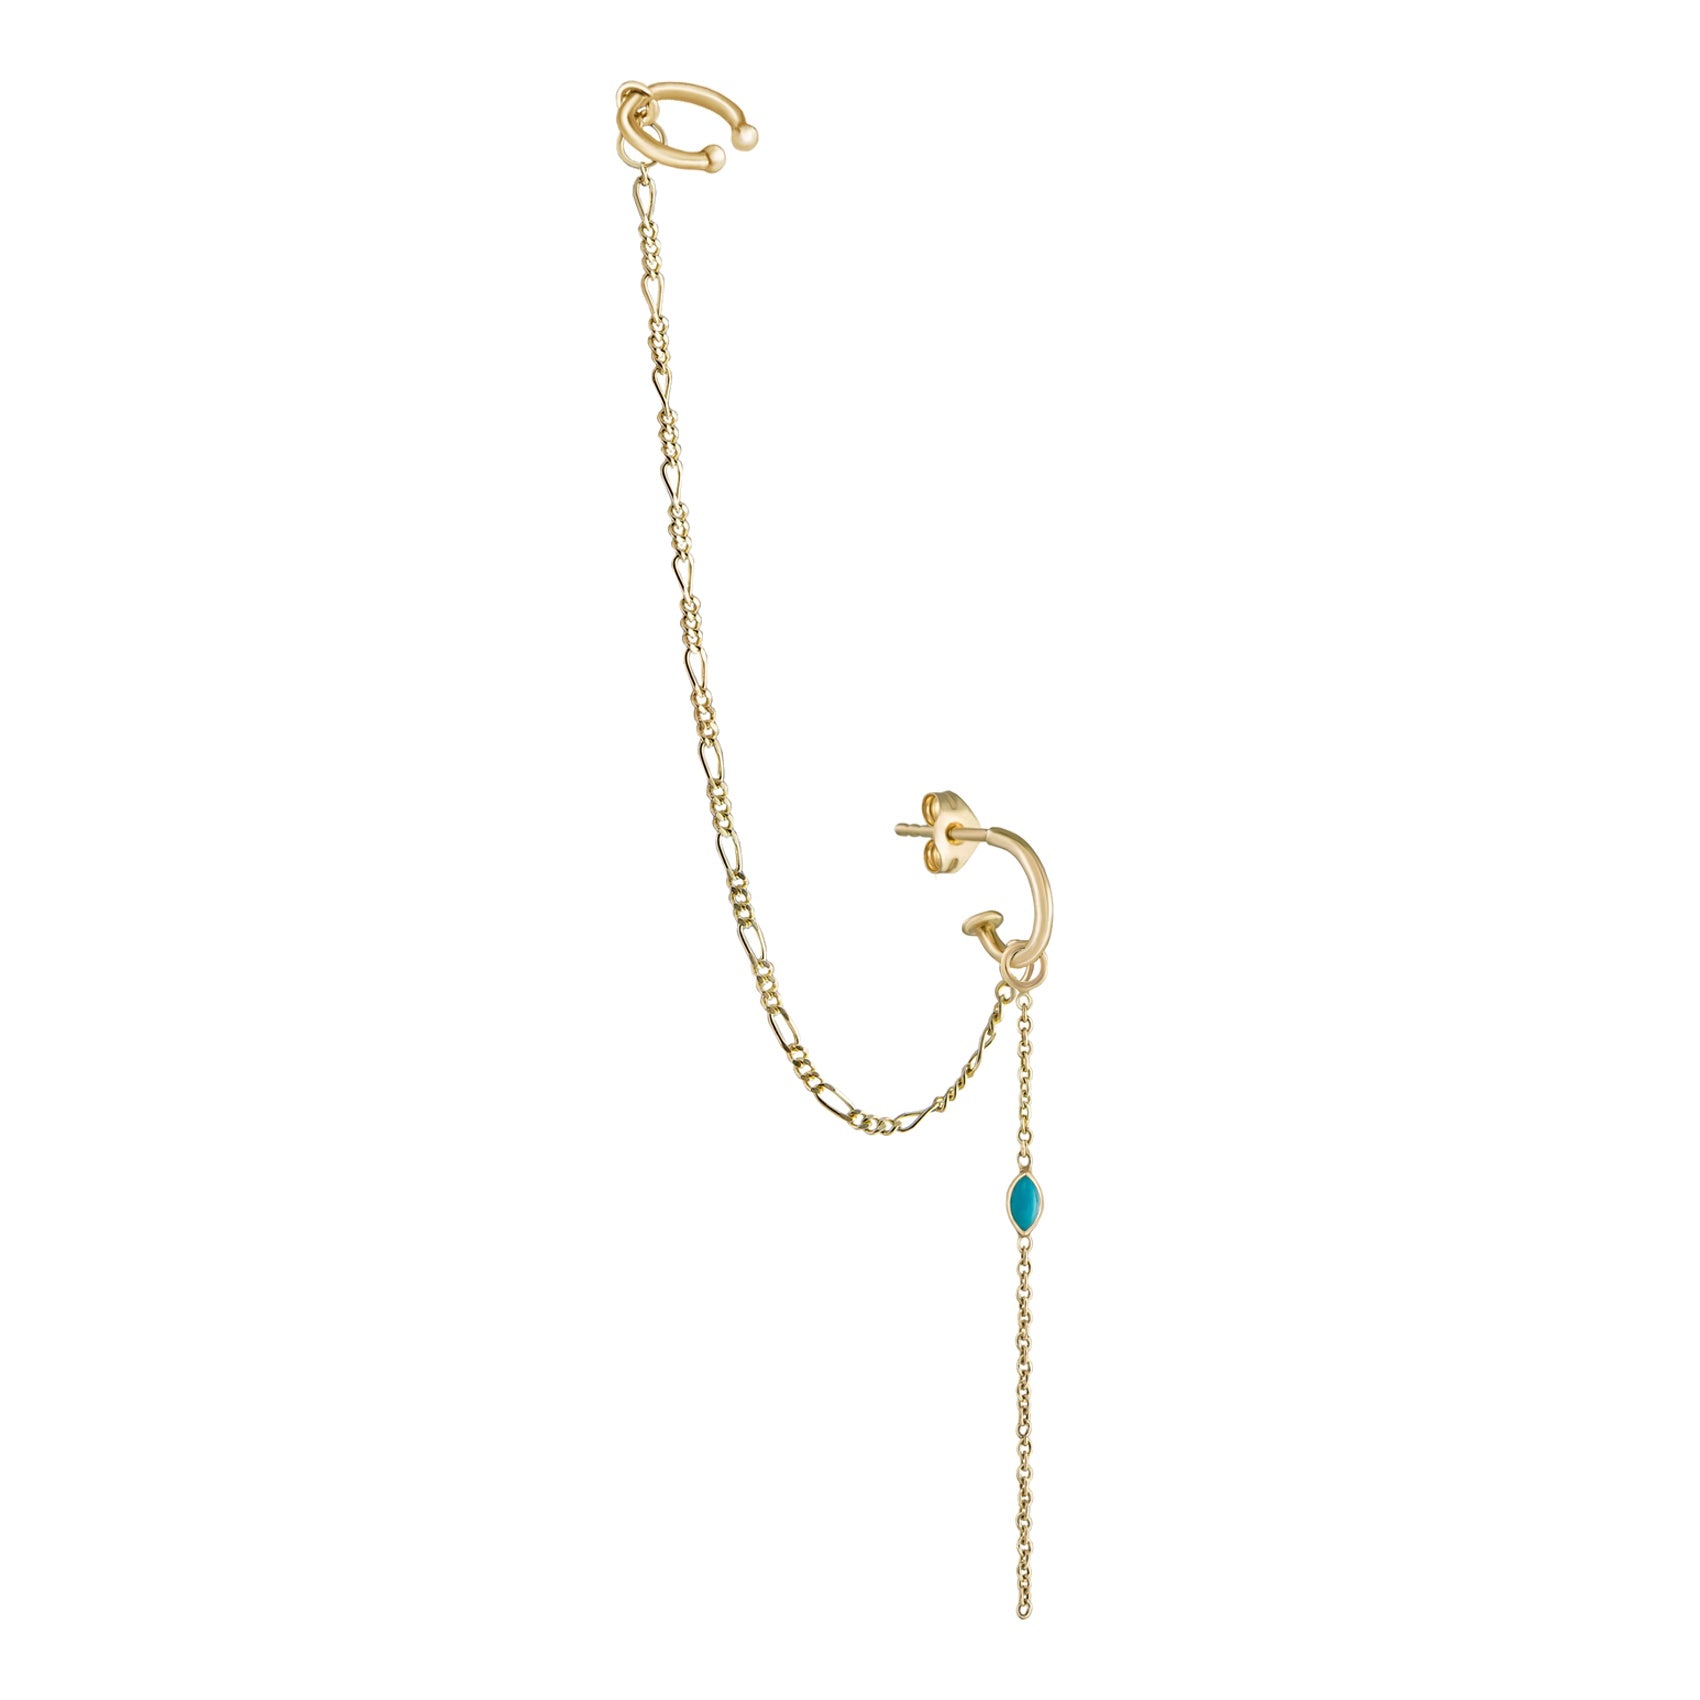 Drop Ear Cuff  + London Add on Chain + Marquise Turquoise Chain Ear Story